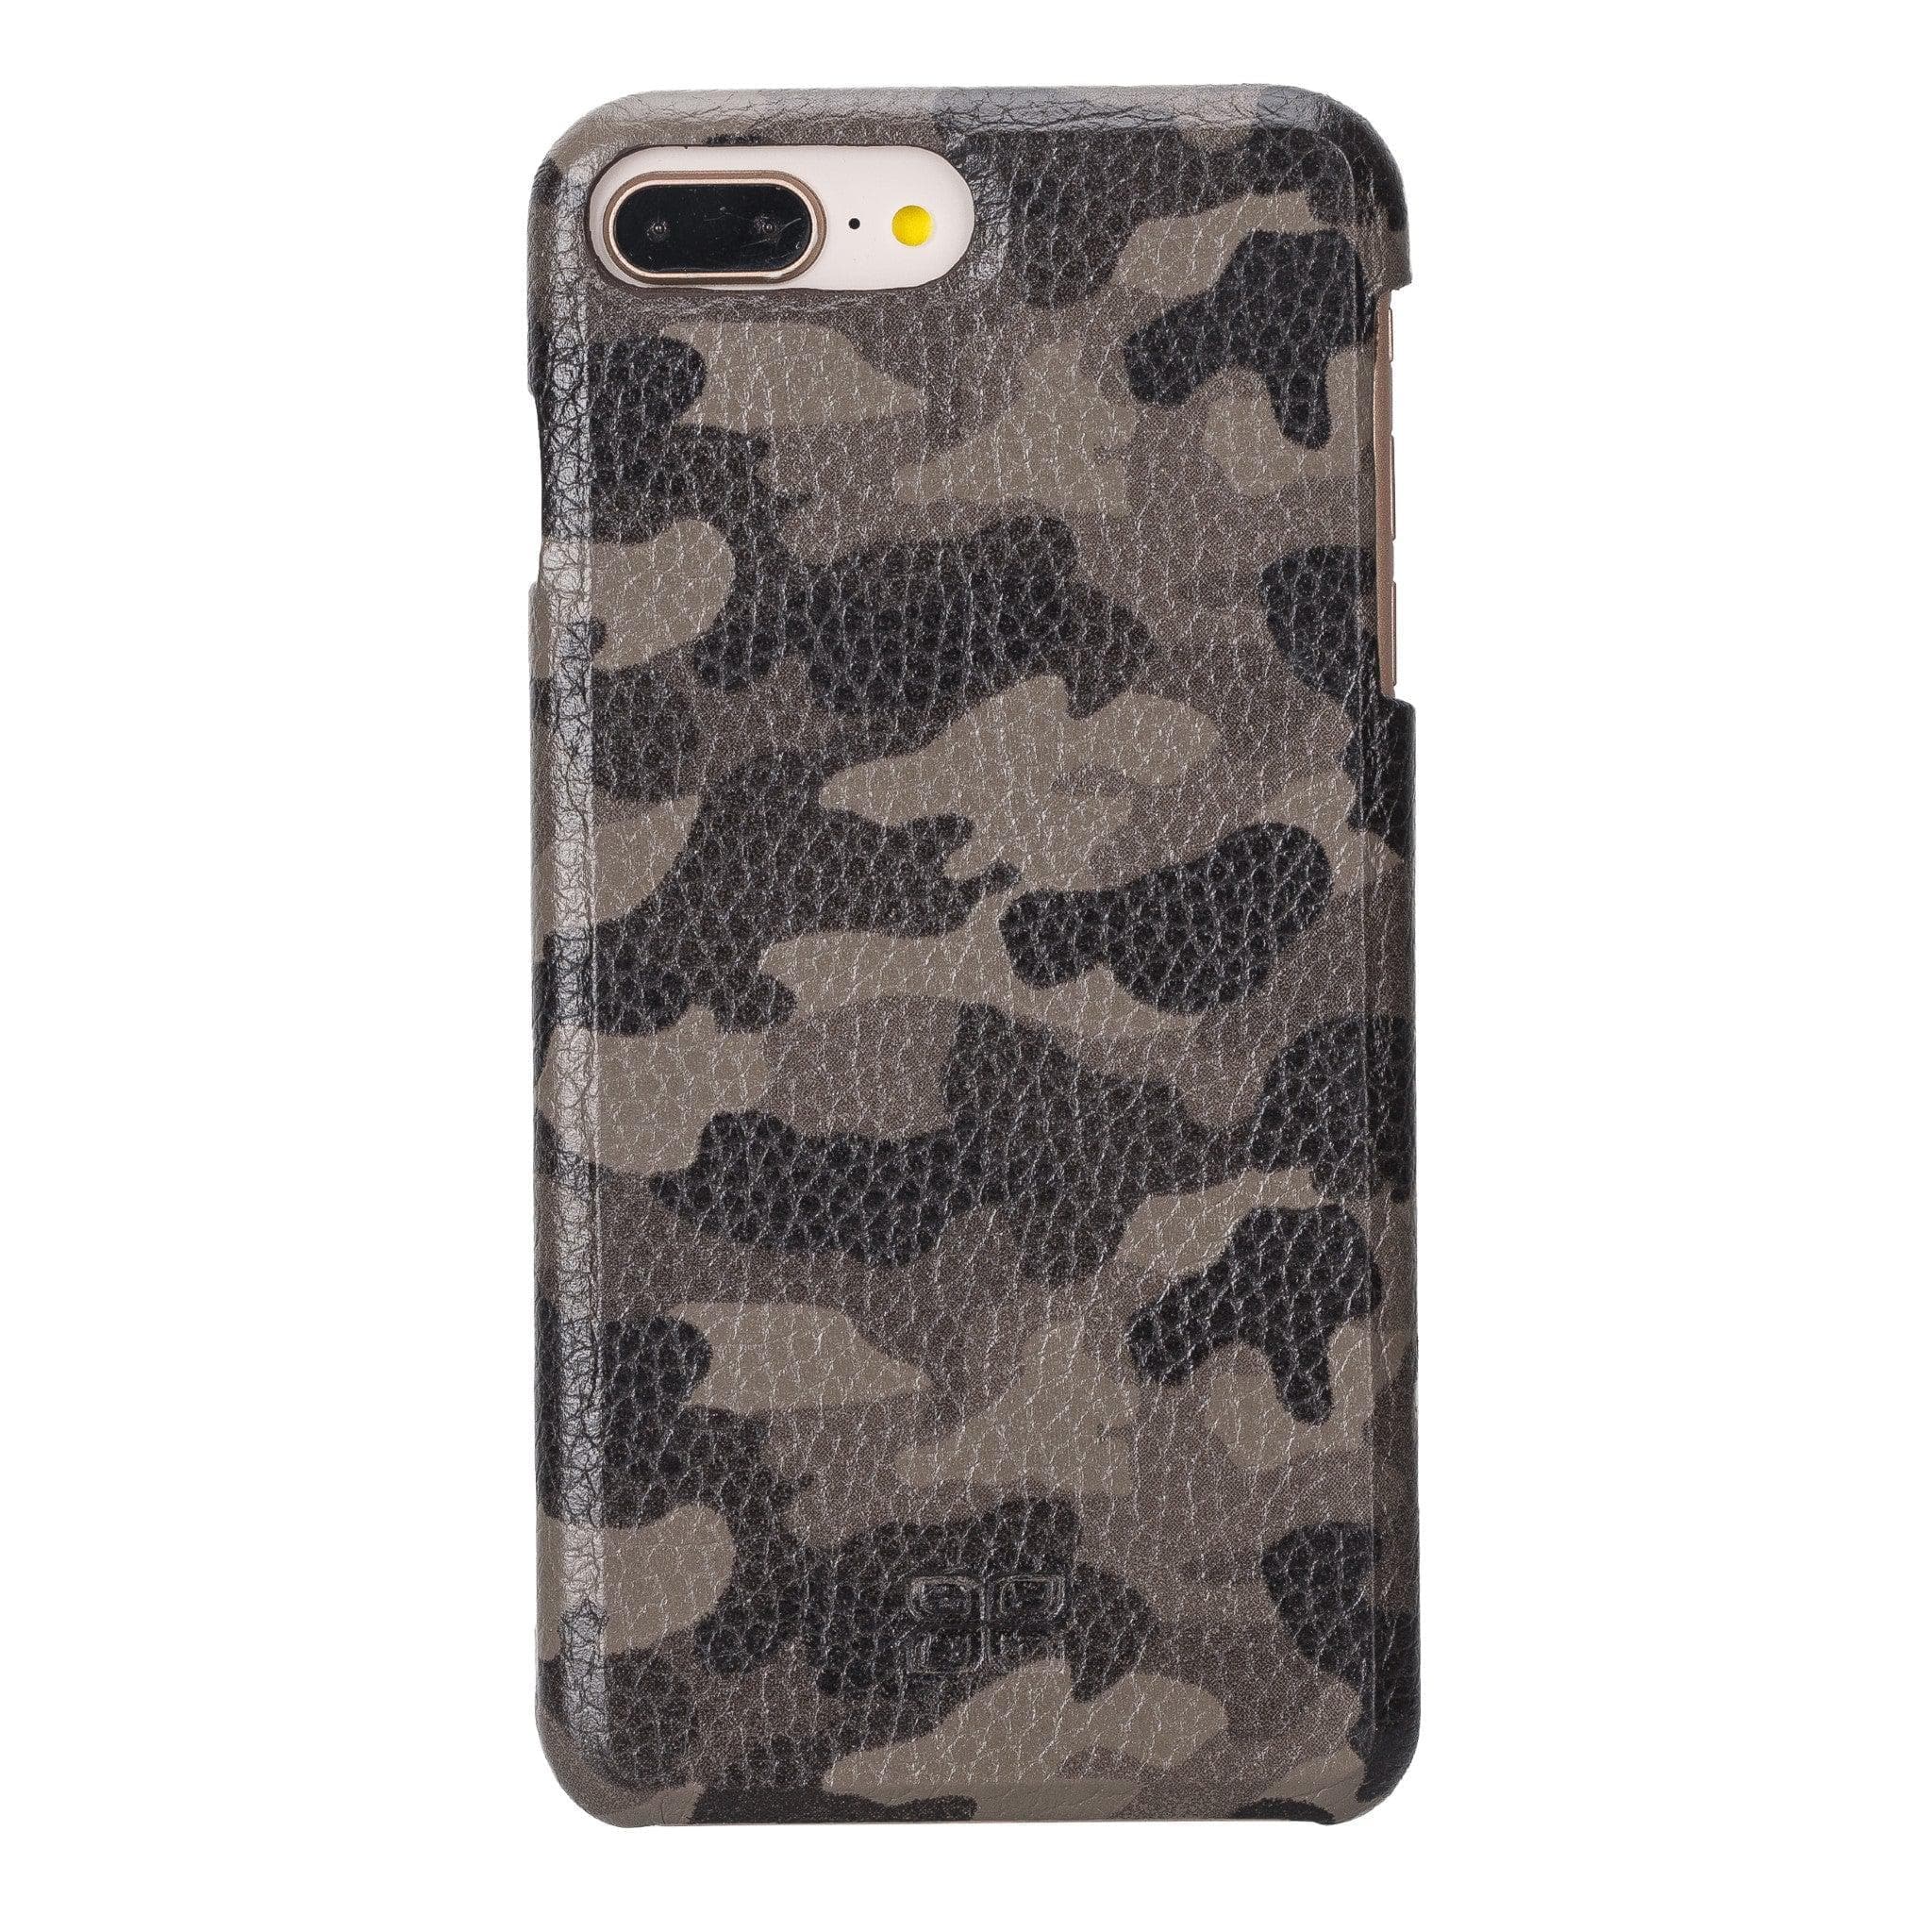 Apple iPhone SE Series Fully Covering Leather Back Cover Case iPhone SE 3rd Generation ( 2022 ) / Camouflage Gray Bouletta LTD